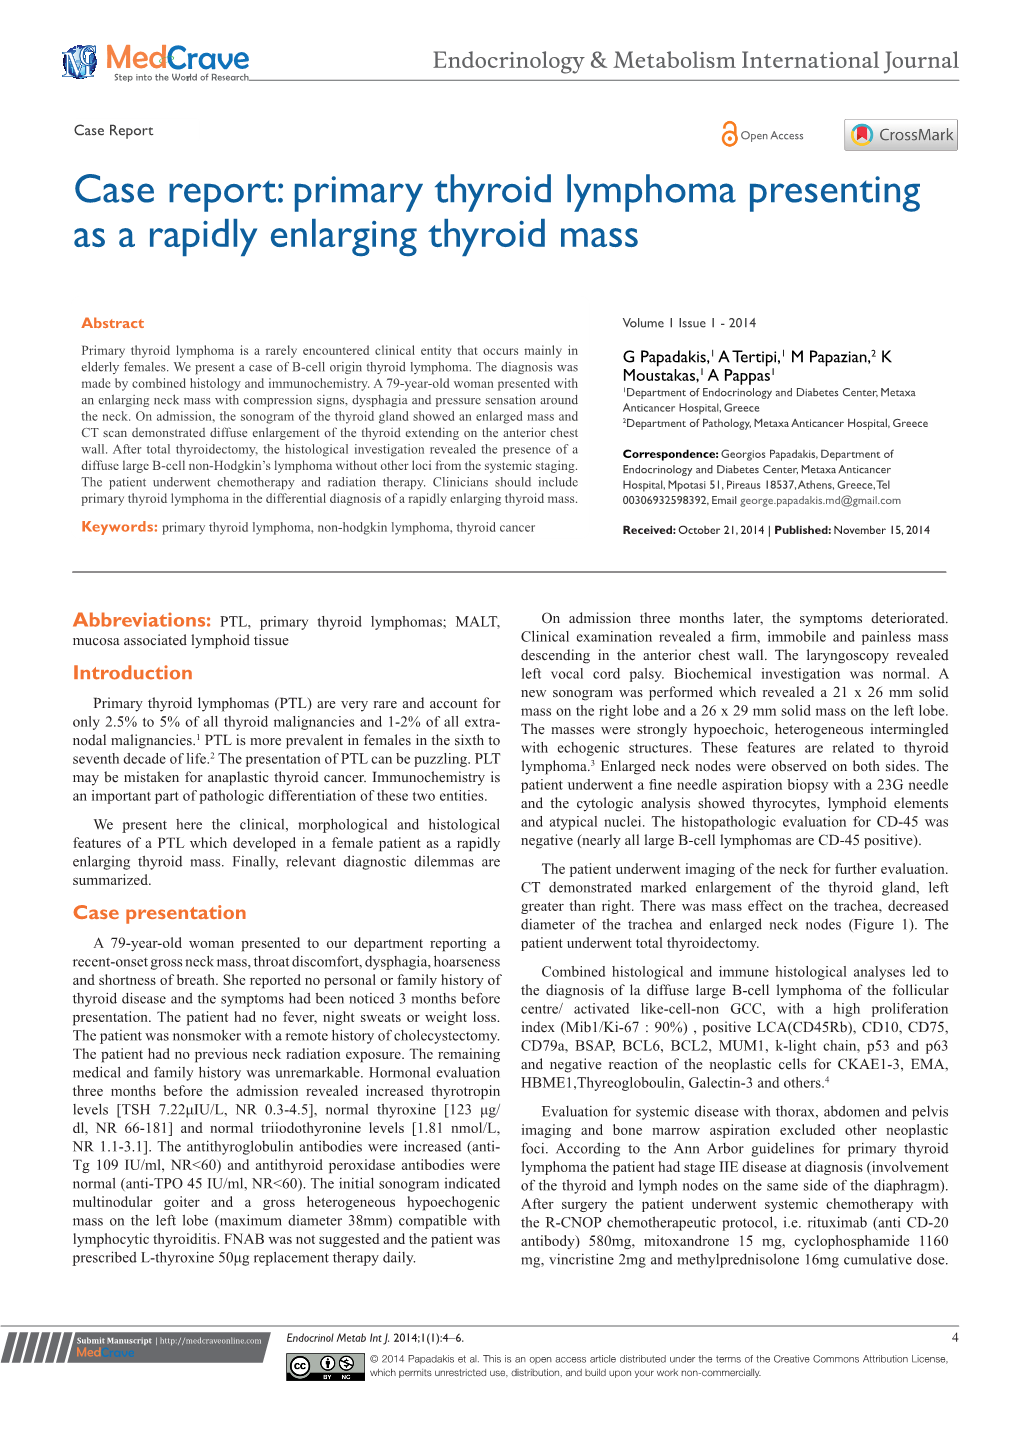 Case Report: Primary Thyroid Lymphoma Presenting As a Rapidly Enlarging Thyroid Mass